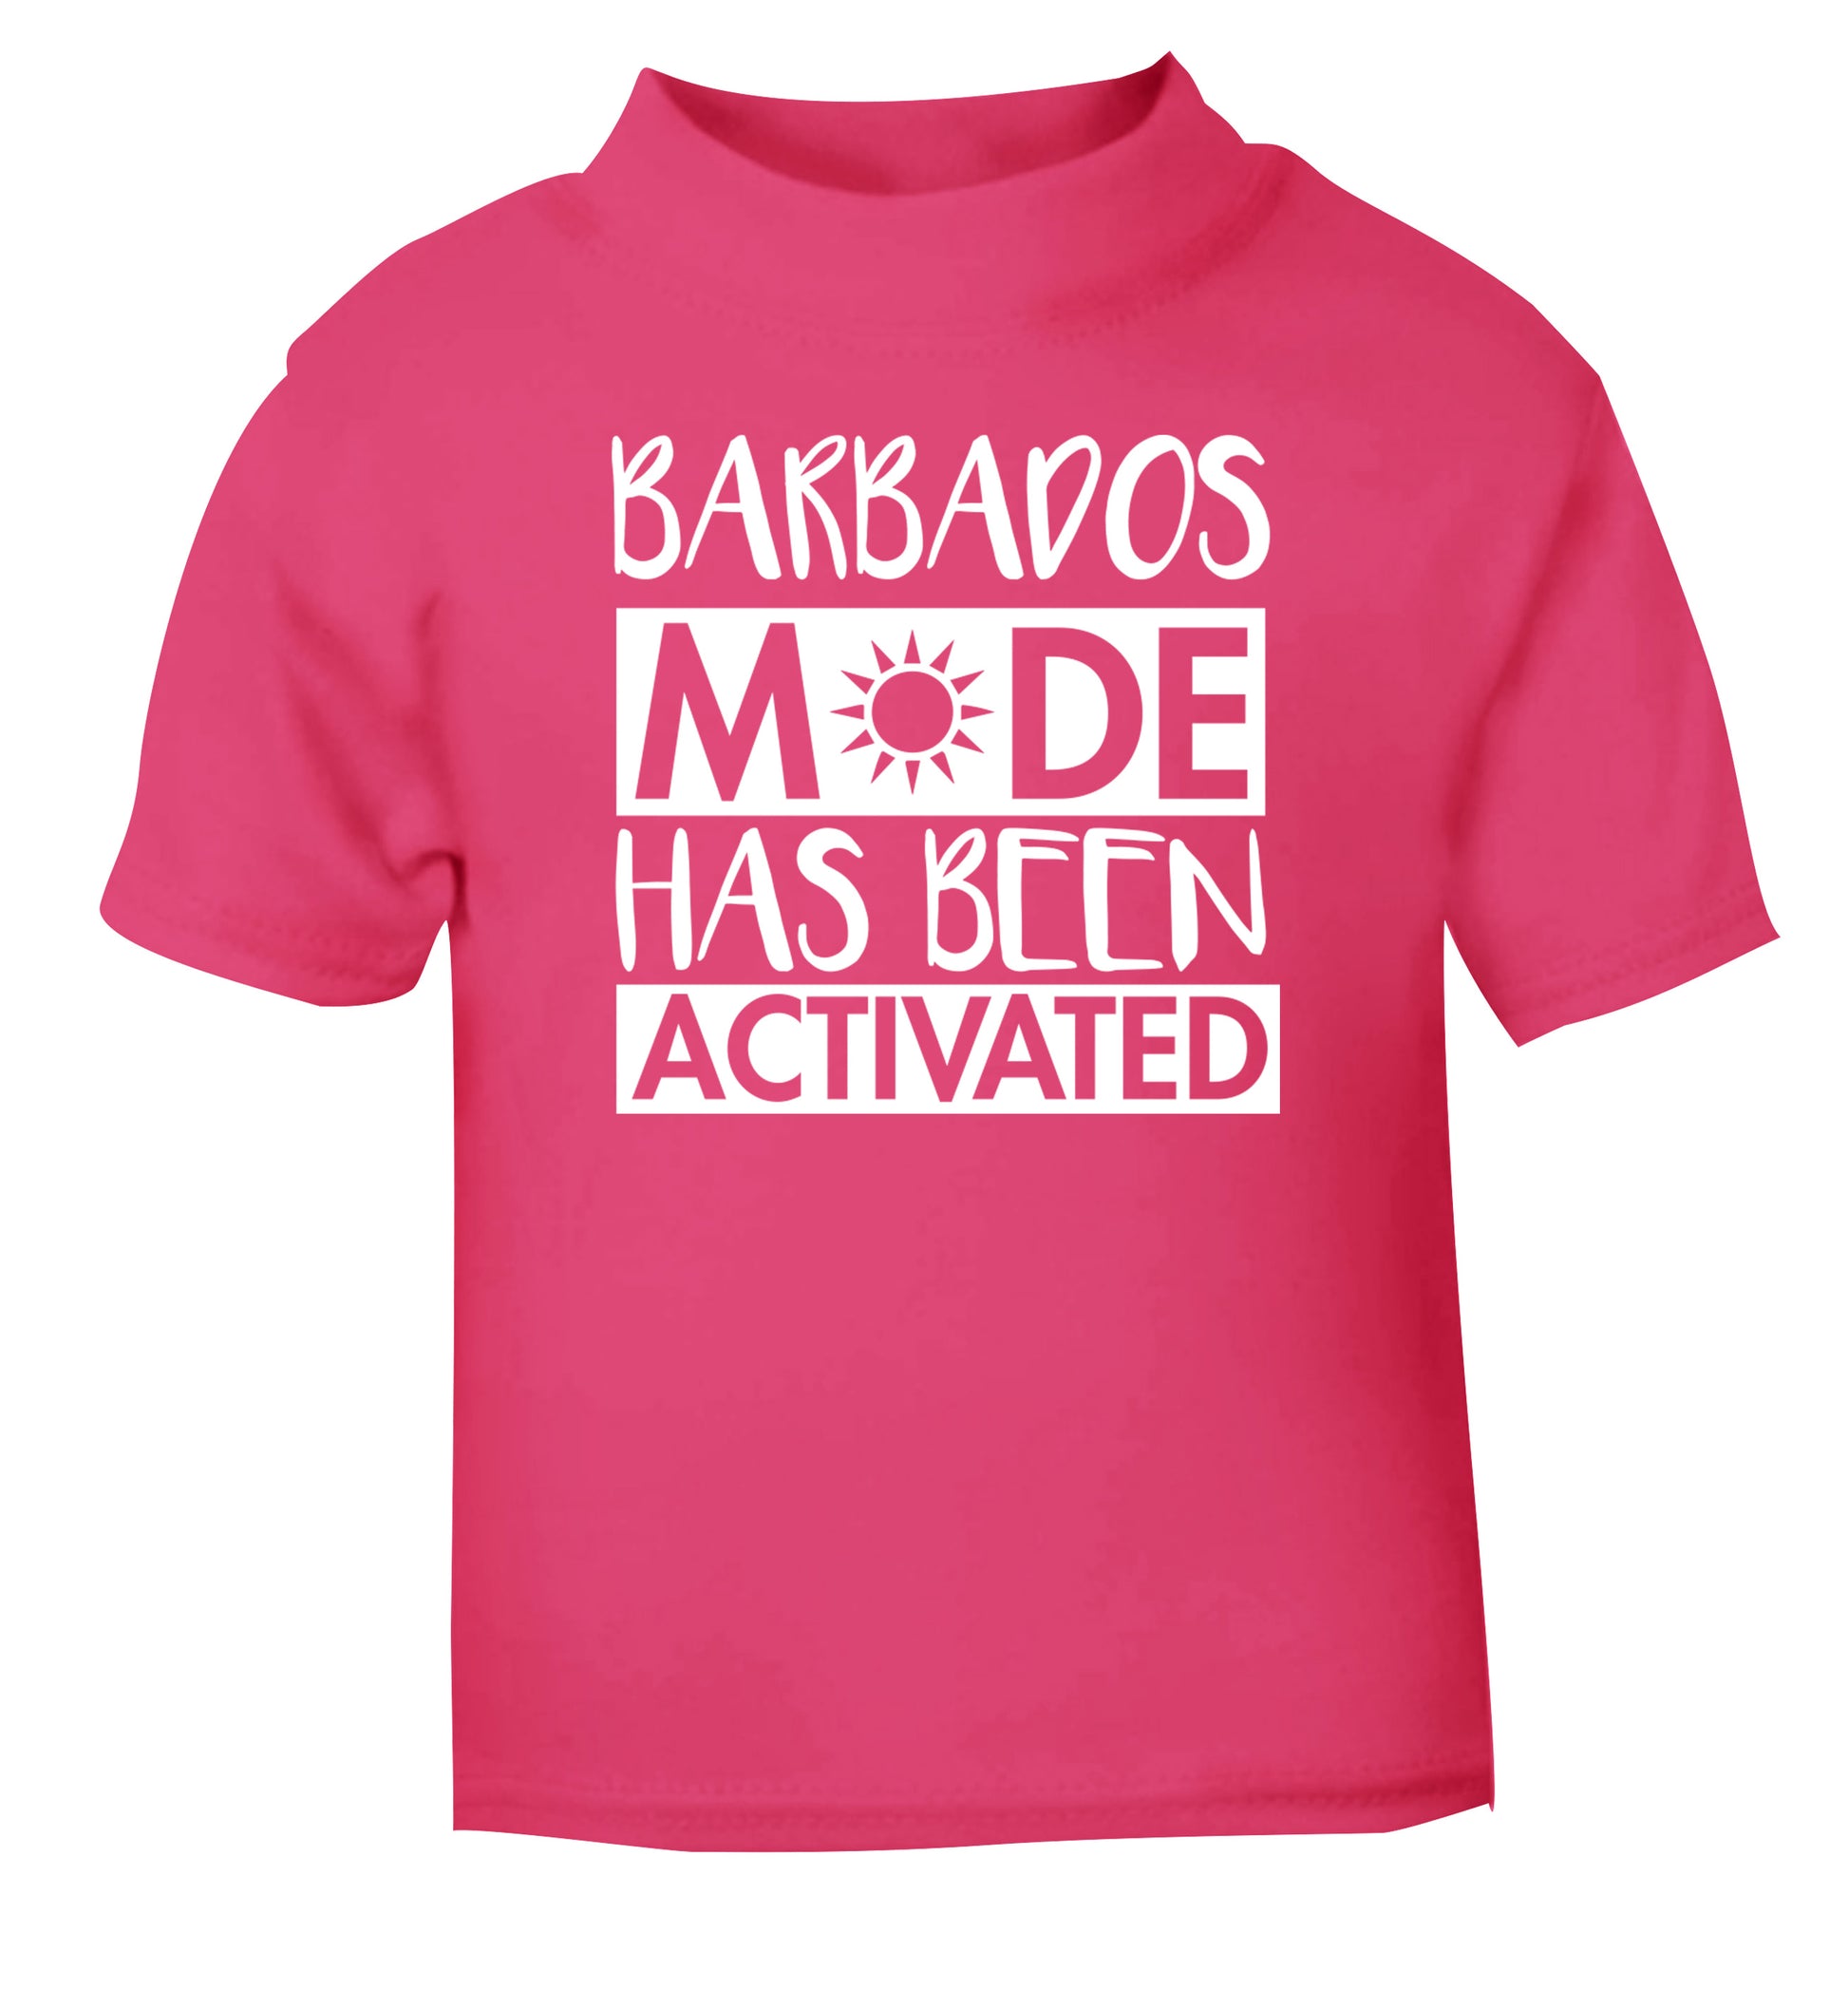 Barbados mode has been activated pink Baby Toddler Tshirt 2 Years